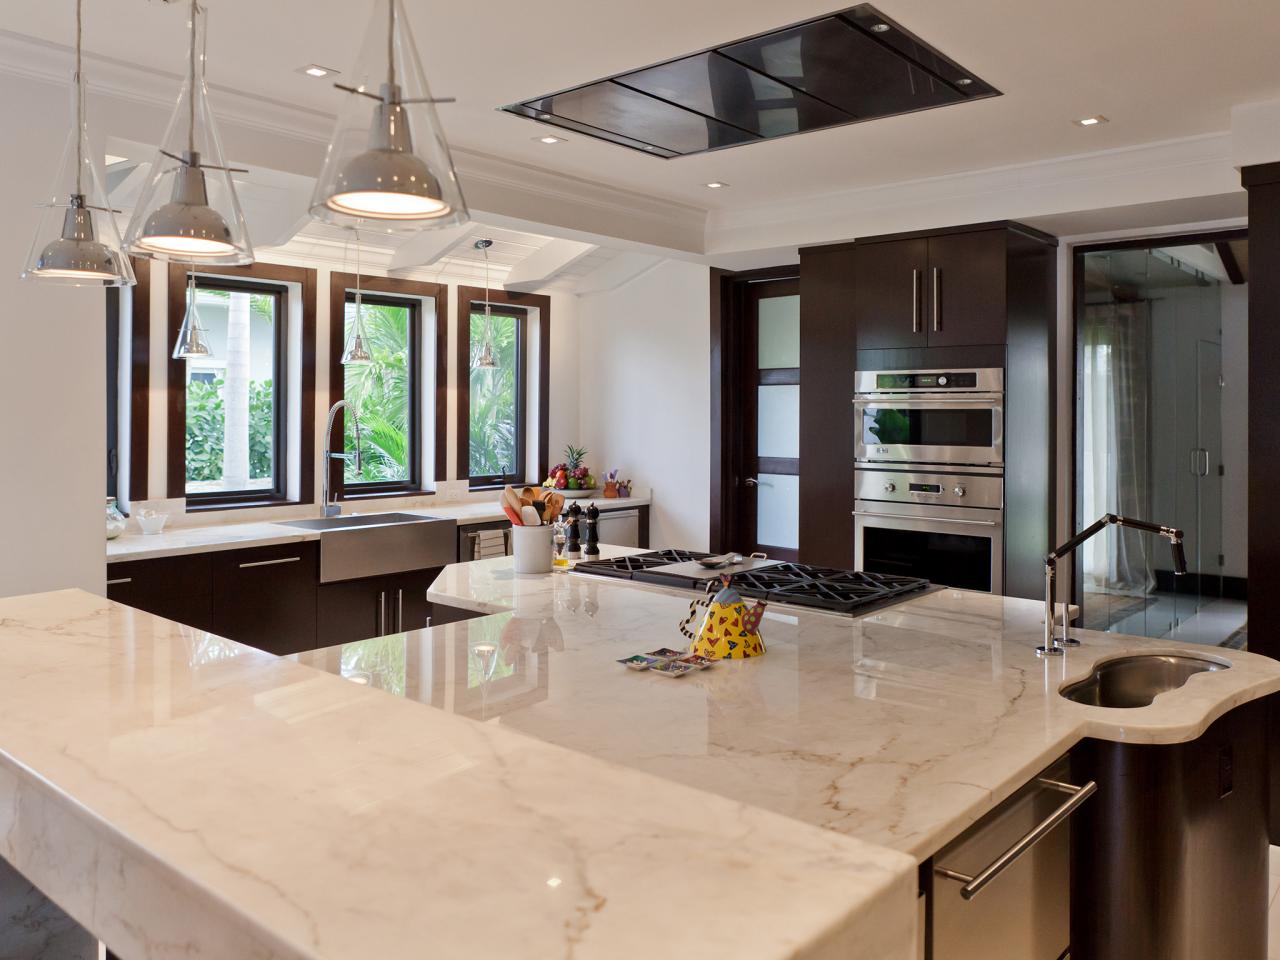 Marble Kitchen Countertops: Pictures & Ideas From HGTV | HGTV